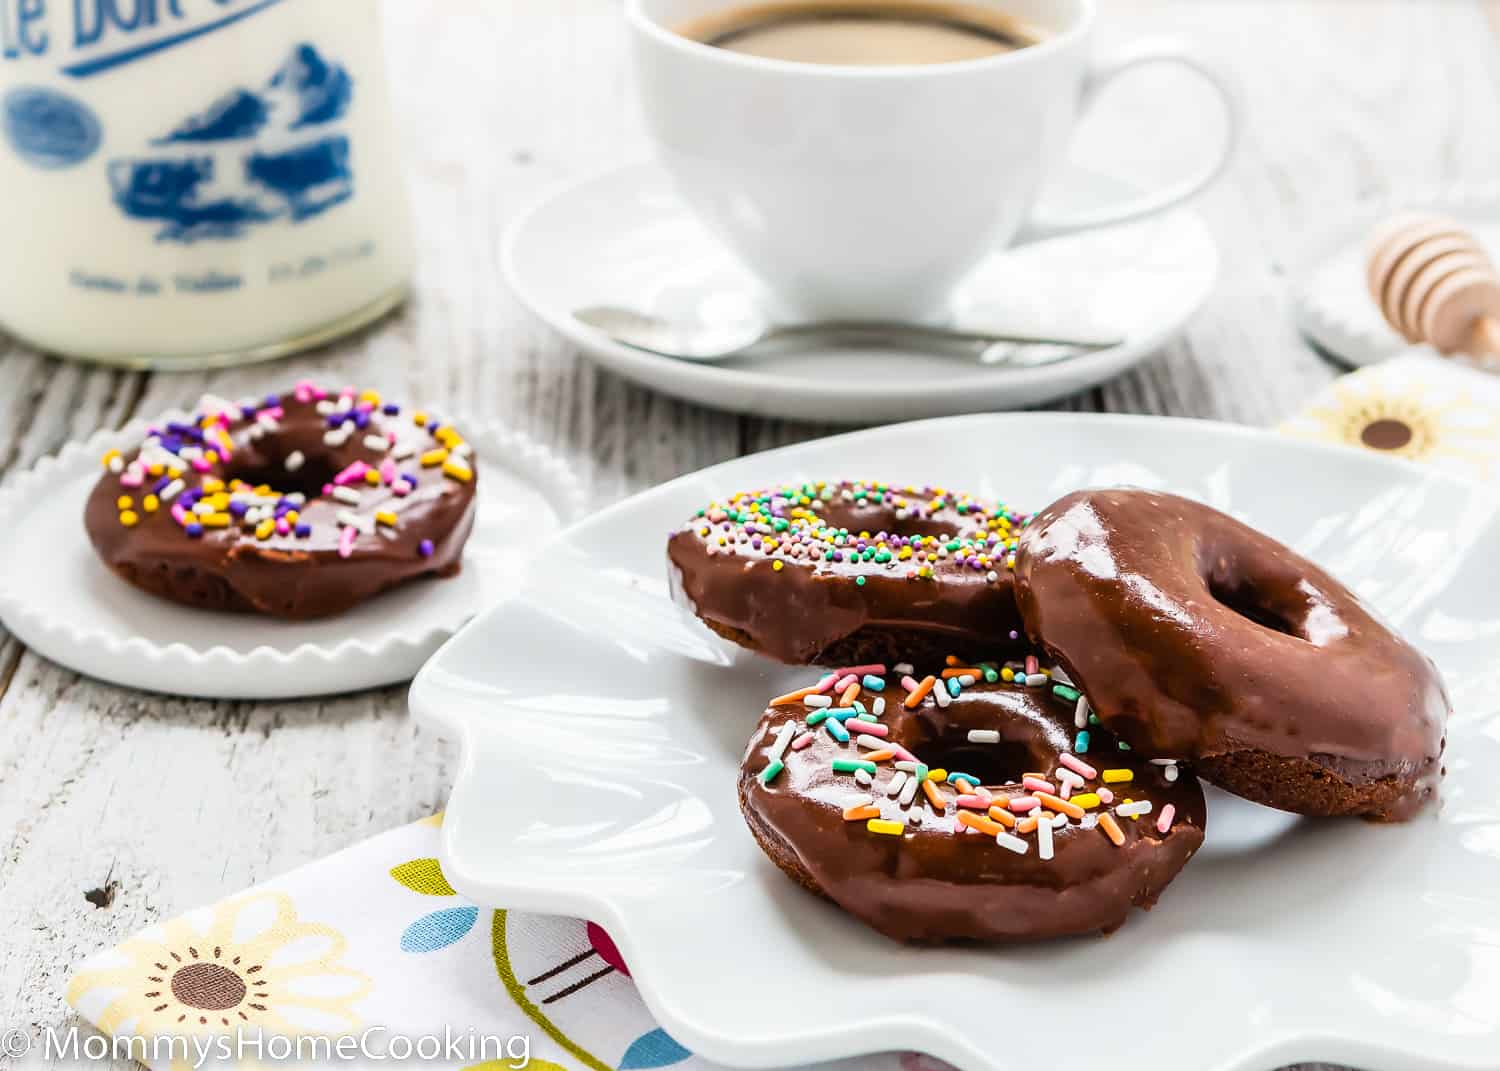 egg-free donuts in a plate with a cup of coffee in the background.